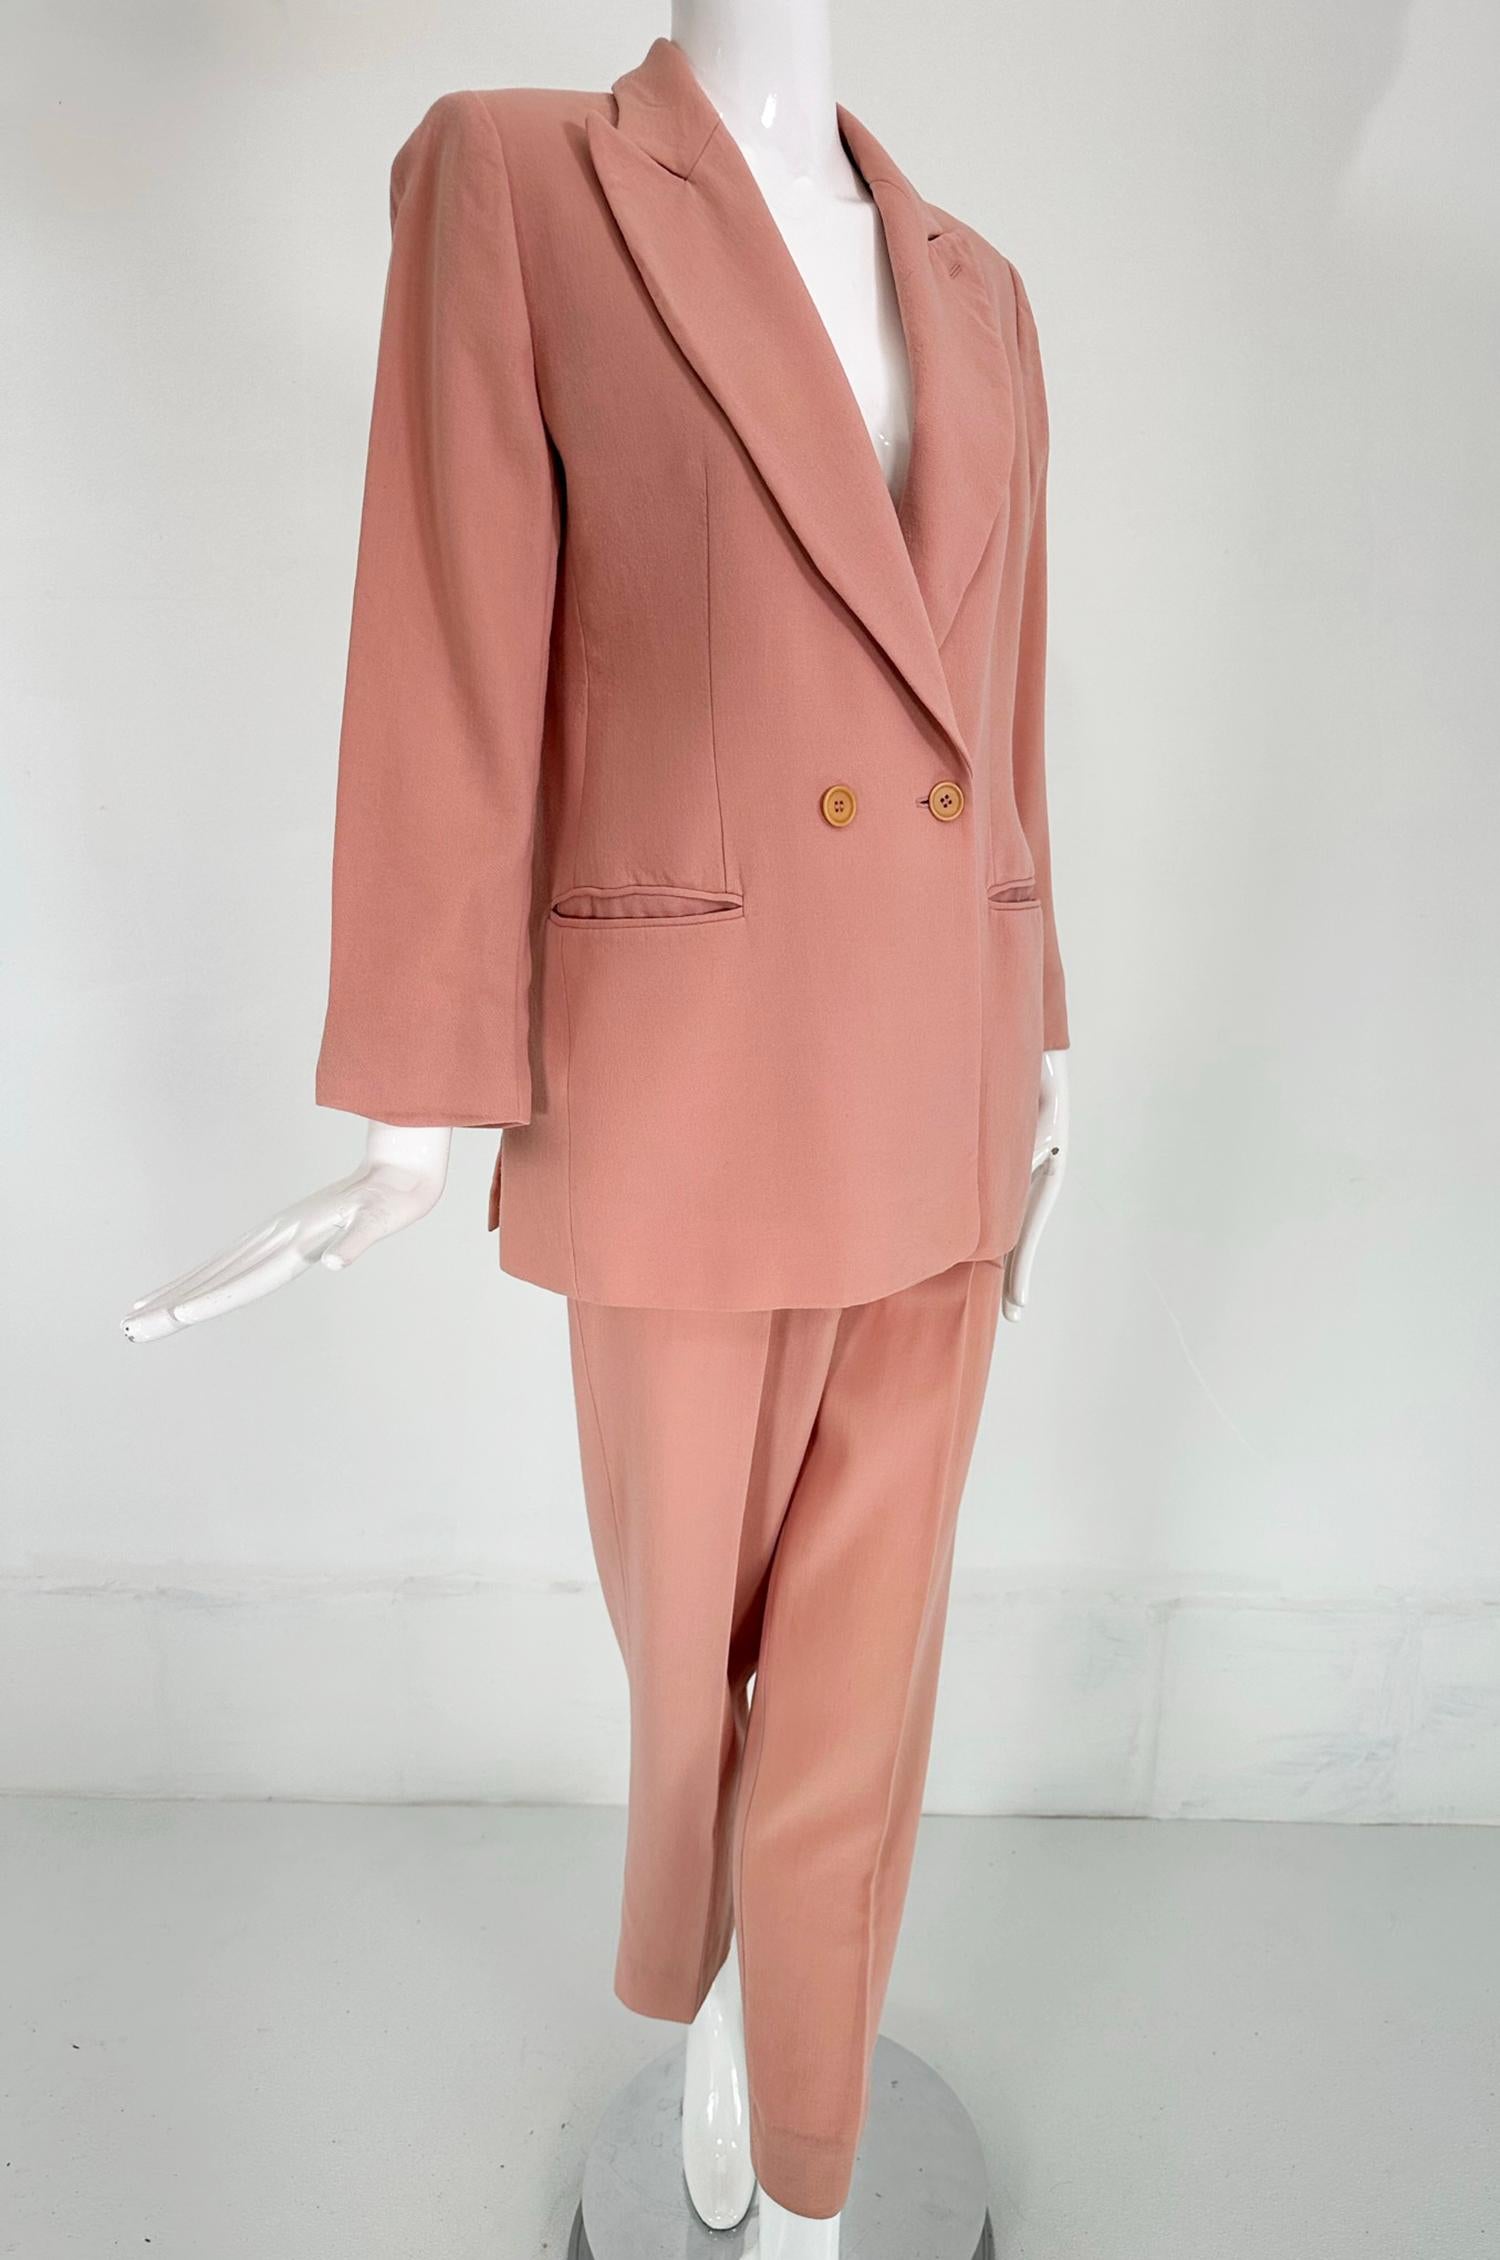 Giorgio Armani Peach Lightweight Wool Double Breasted Pant Set from the early 1990s. Double breasted jacket closes at the waist with two buttons, notched lapels and besom pockets at the hip fronts. The jacket has side hem vents at the back, fully